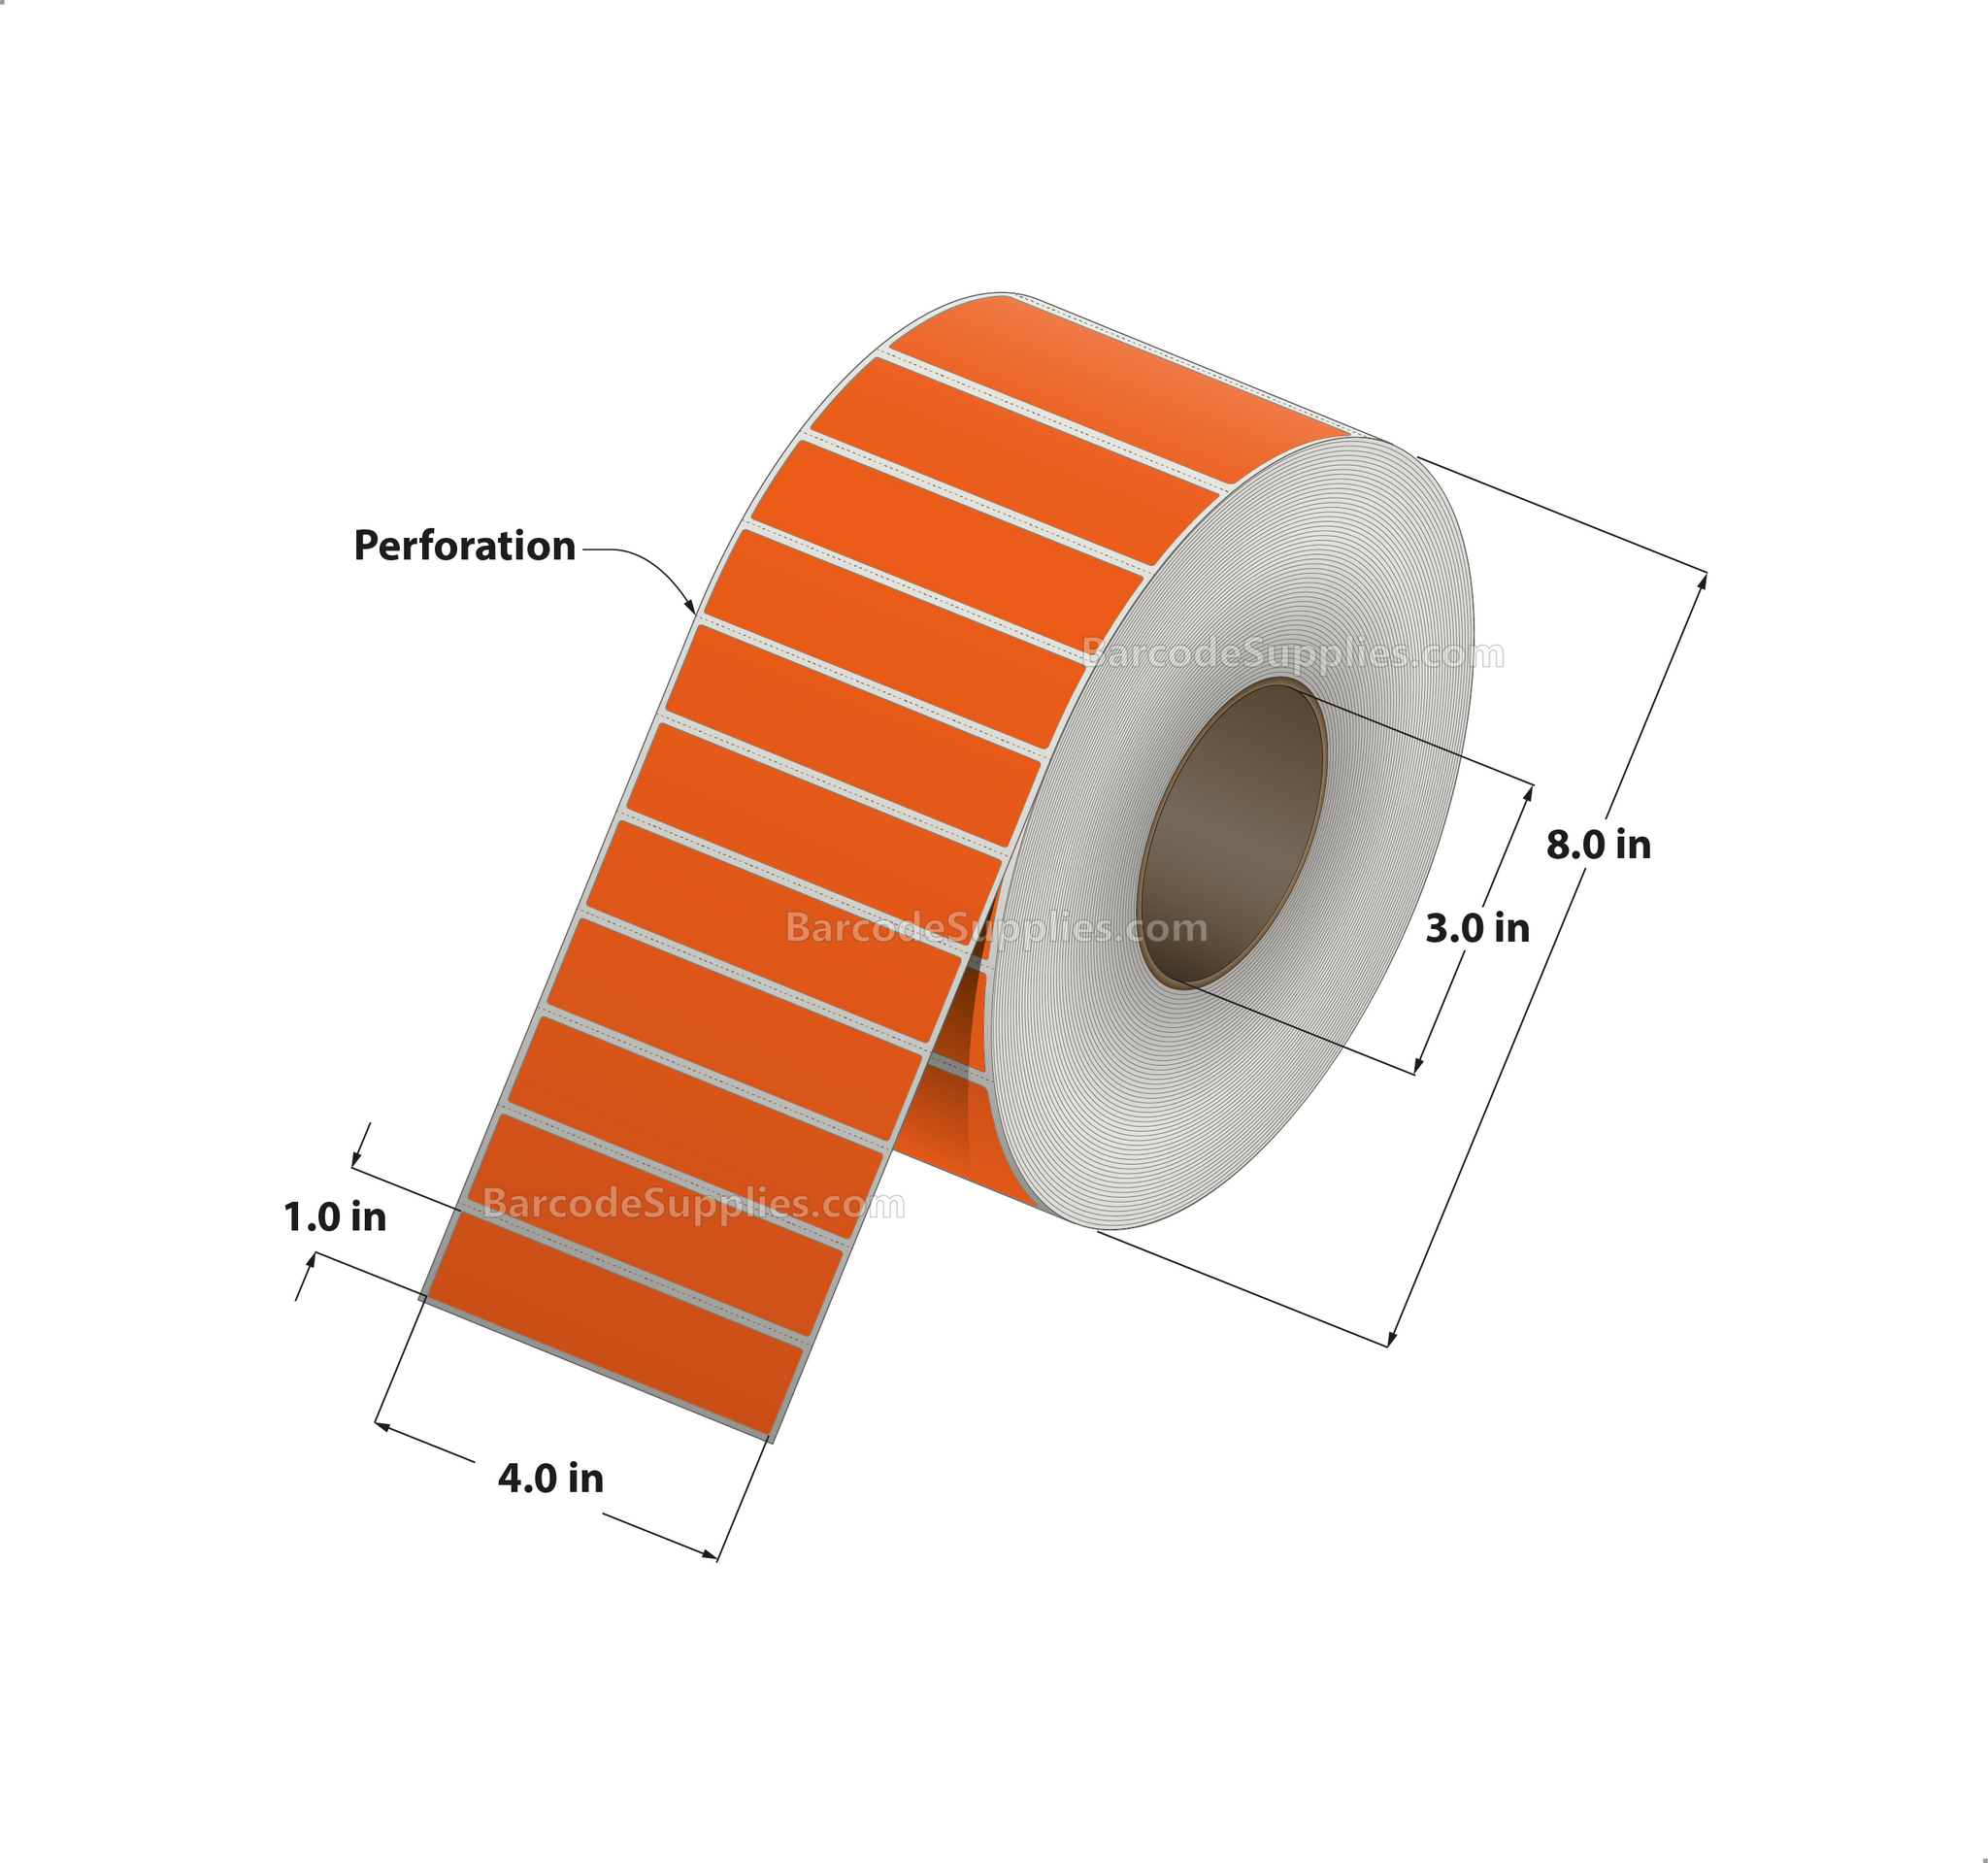 4 x 1 Thermal Transfer 1495 Orange Labels With Permanent Adhesive - Perforated - 5500 Labels Per Roll - Carton Of 4 Rolls - 22000 Labels Total - MPN: RFC-4-1-5500-OR